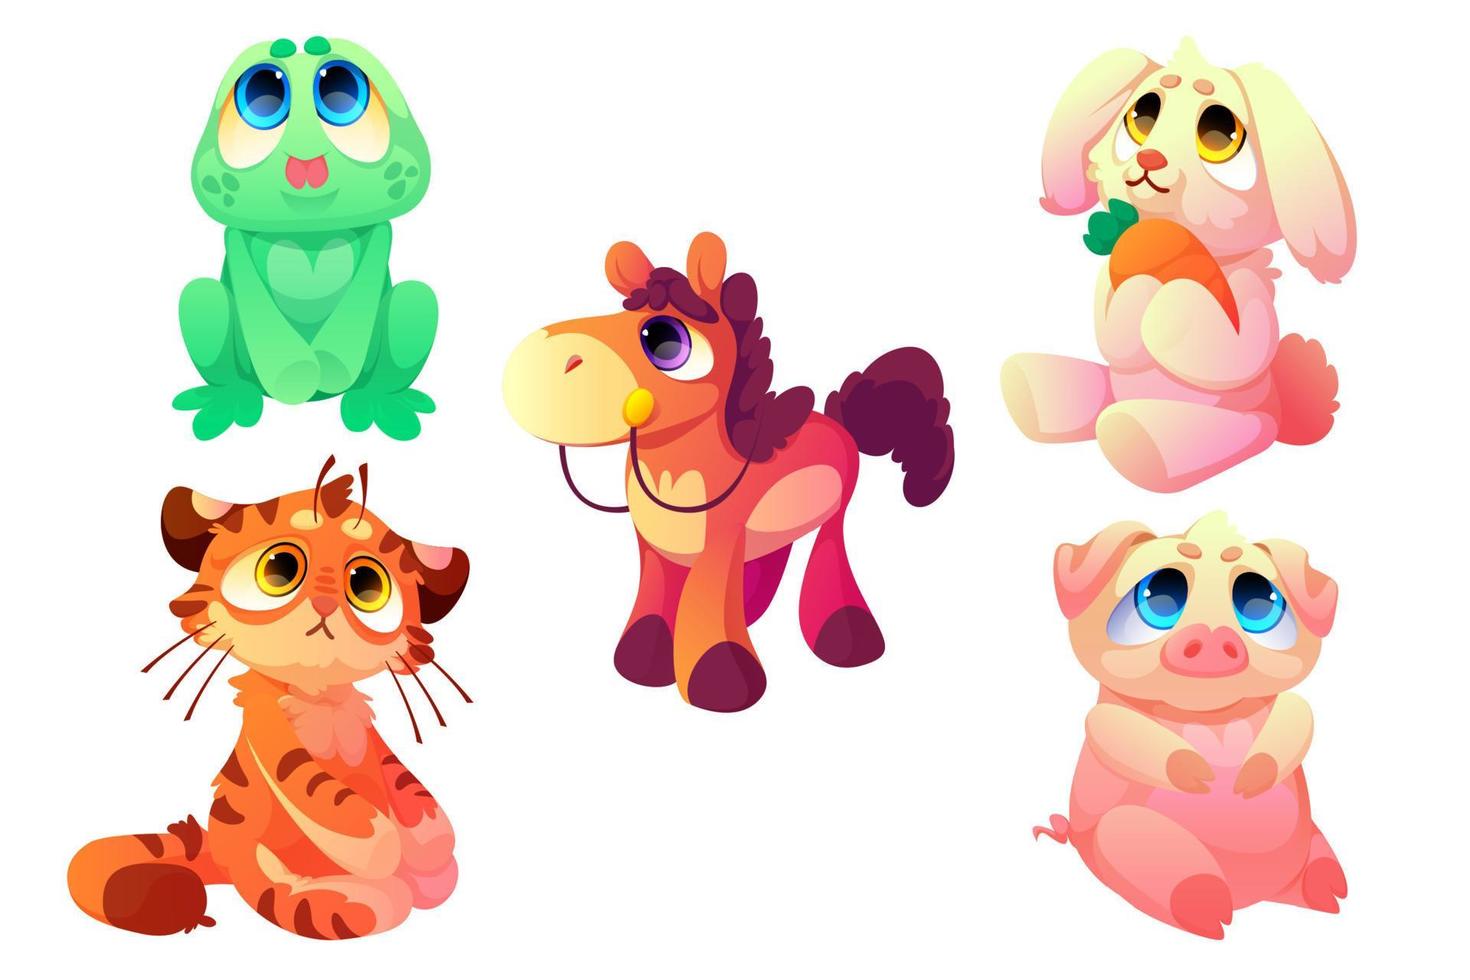 Plush toys, funny soft frog, horse, tiger, bunny vector